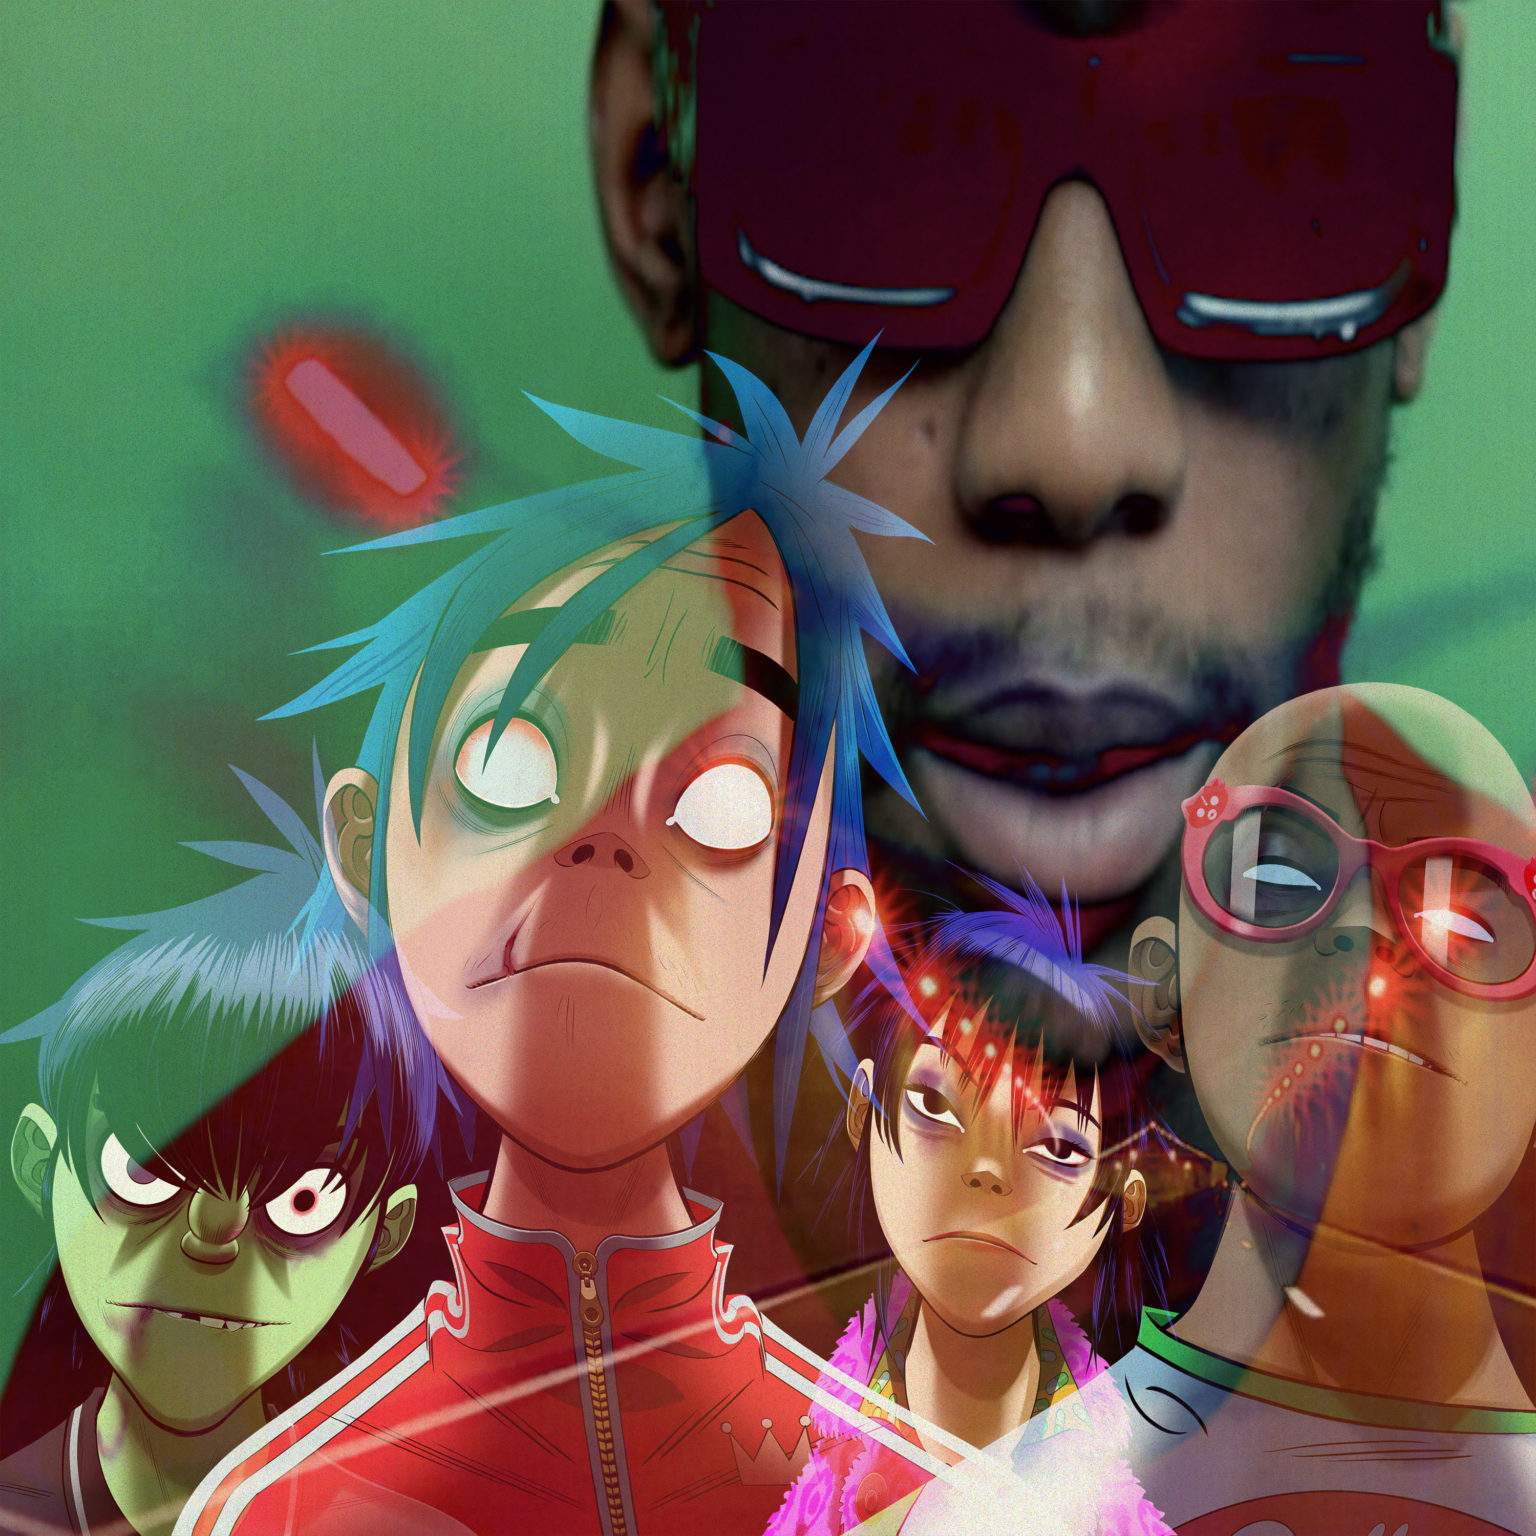 Gorillaz have released their fourth episode of of Song Machine from A hypnotic meditation, entitled "Friday 13th." The track features rapper/singer Octavian